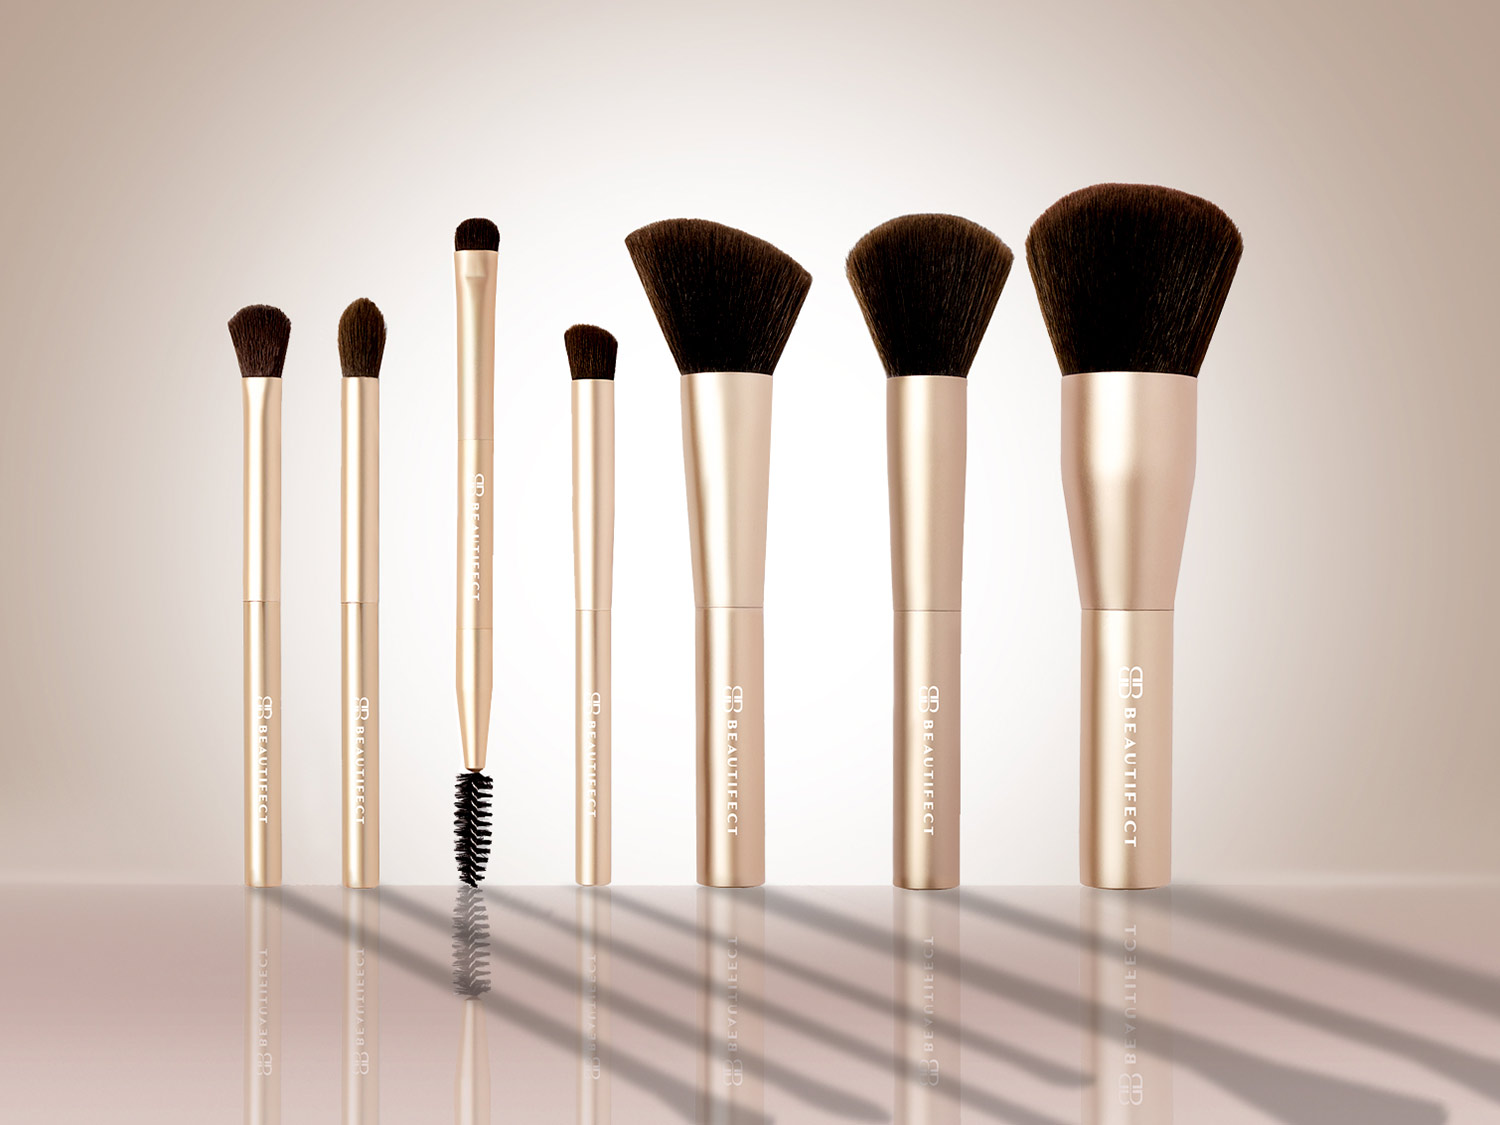 FLAWLESS MAKEUP MADE EASY WITH THE BEAUTIFECT BRUSH COLLECTION